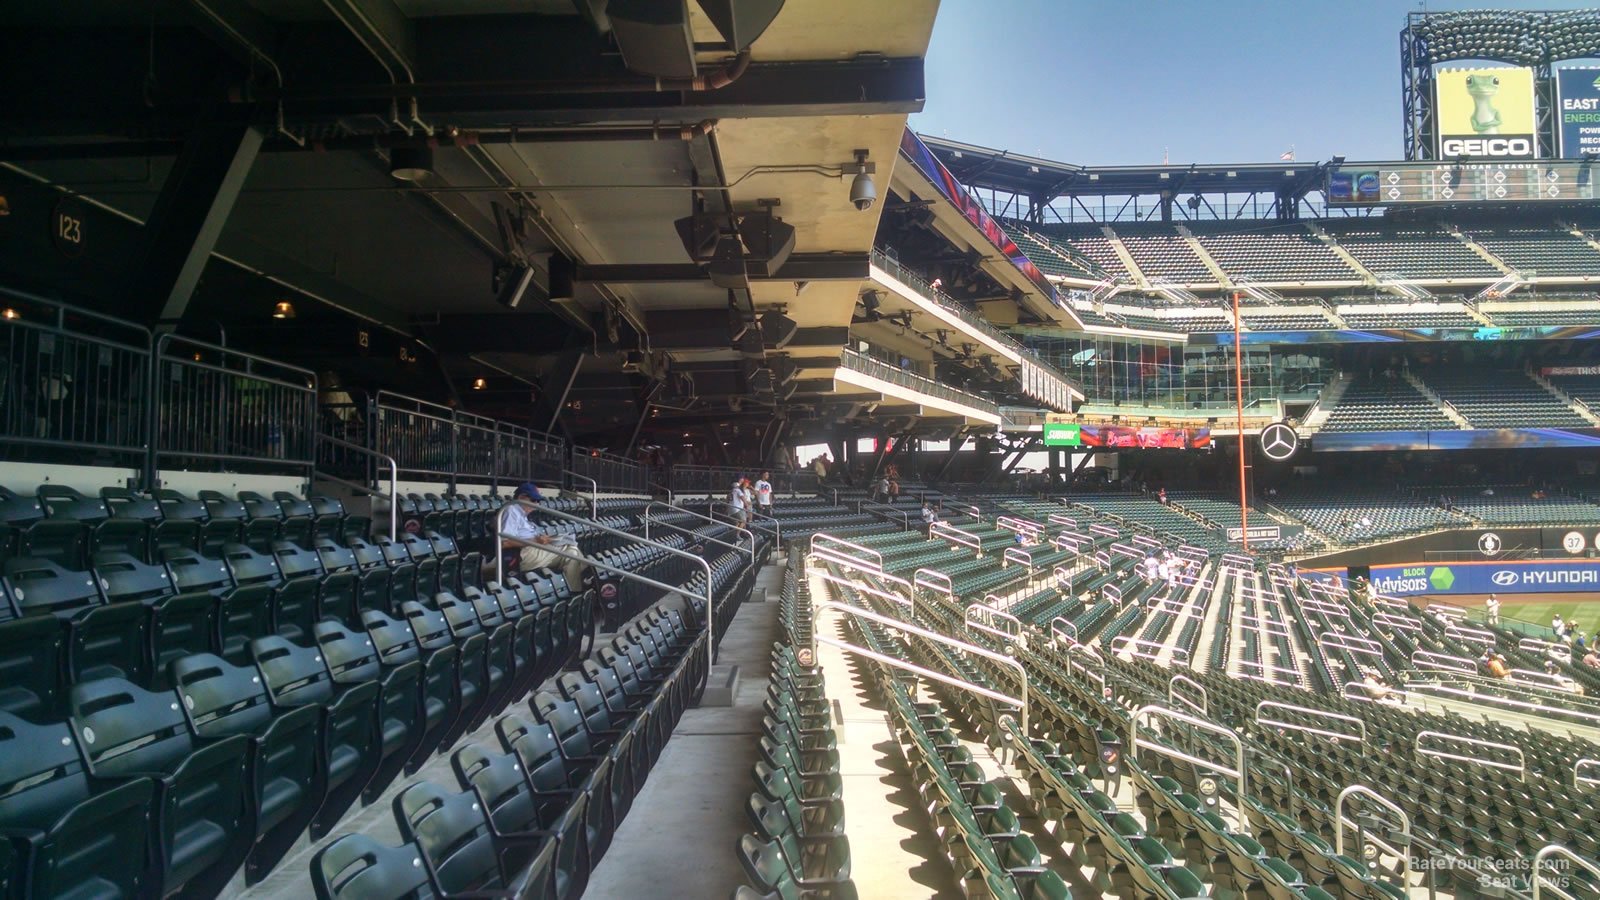 shade and cover by section 121